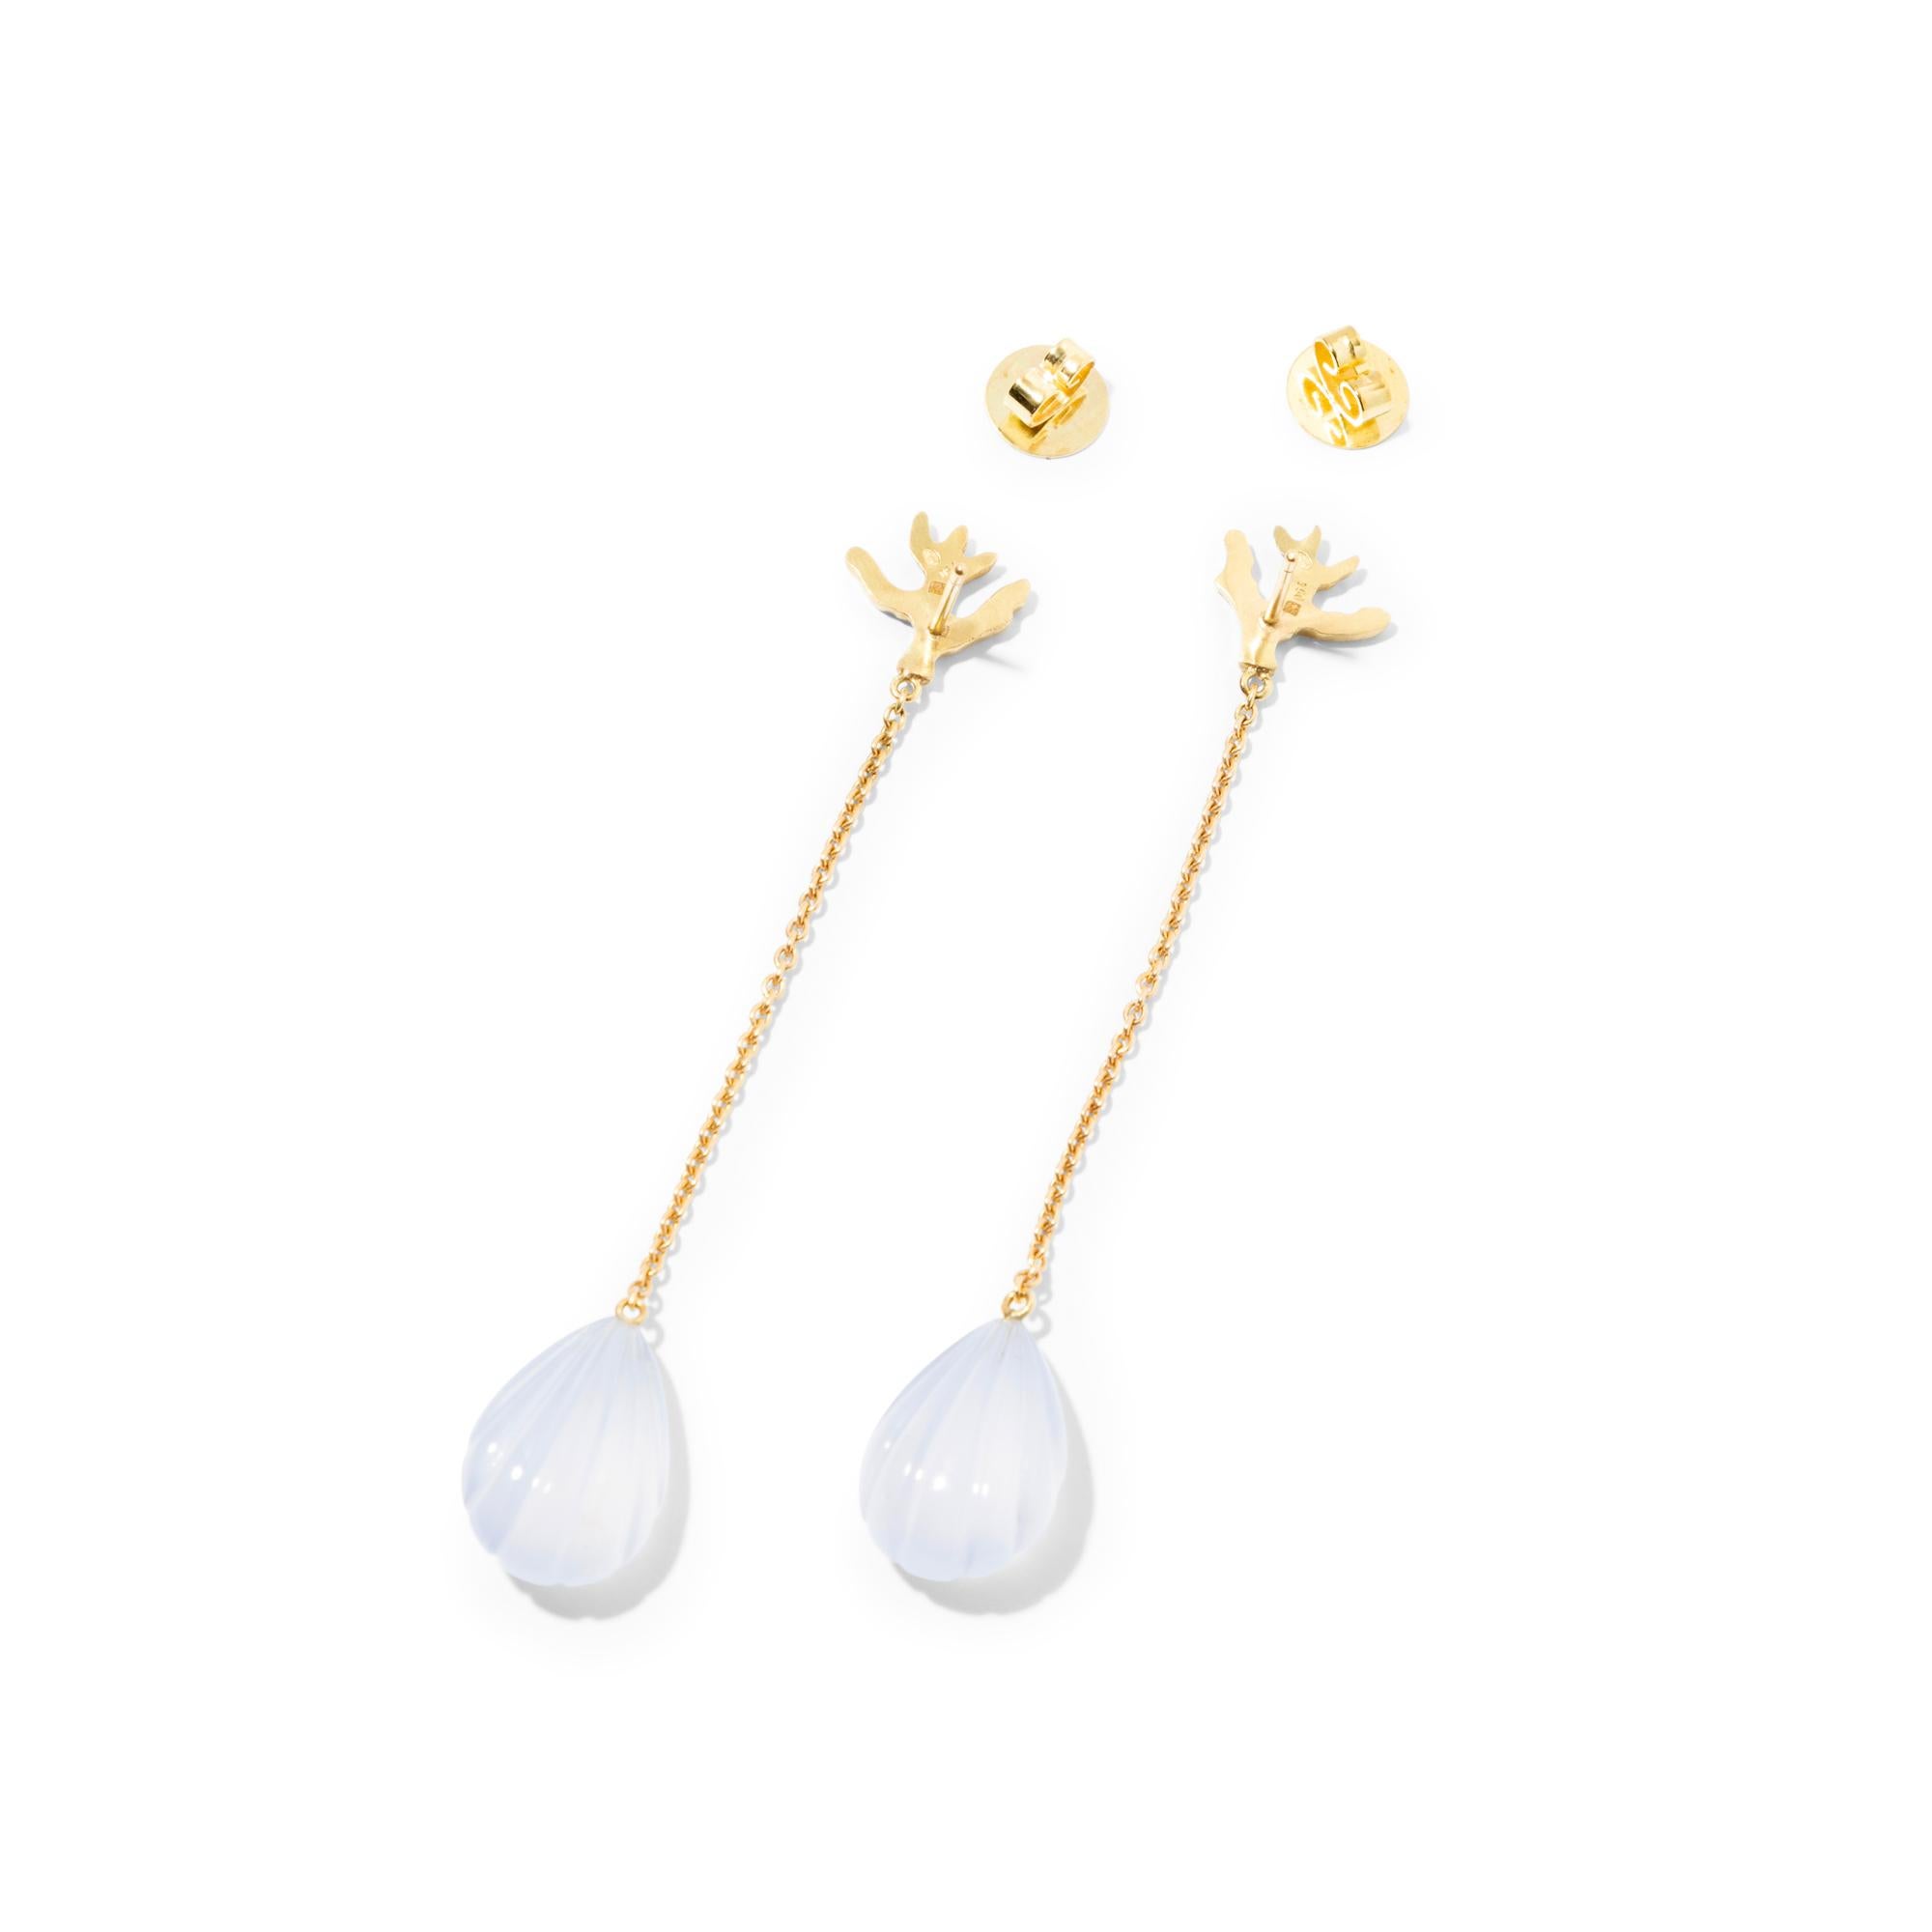 A feminine and elegant pair of 18k gold chain earrings with carved pale blue chalcedony shells, suspended from a gold coral motif that neatly covers the earlobe.  A great everyday piece of jewelry when only a hint of color is needed. Playful and